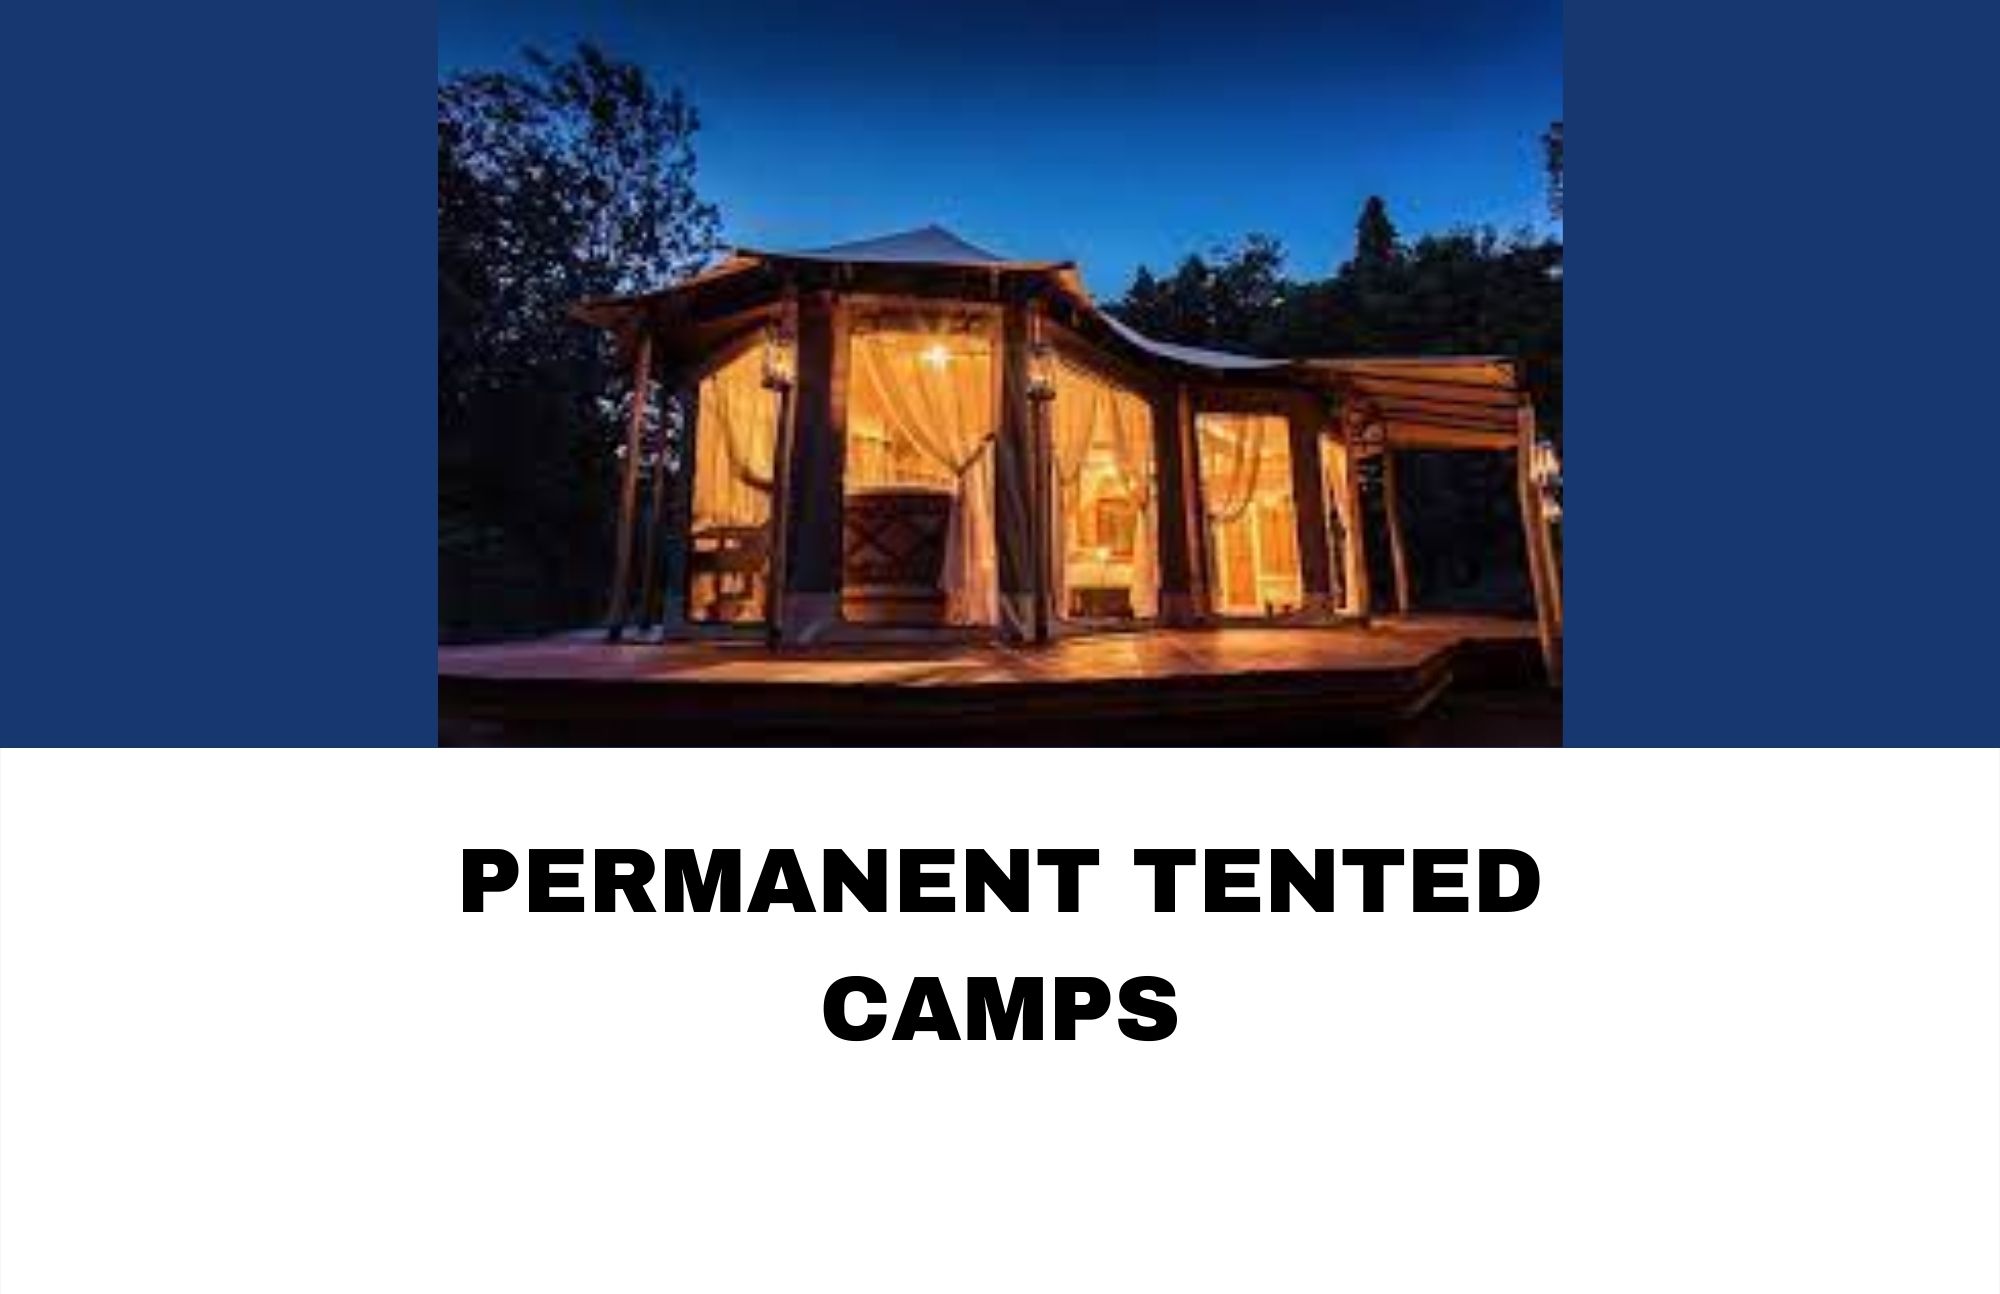 Permanent tented camps with yellow lights inside under the dark blue sky